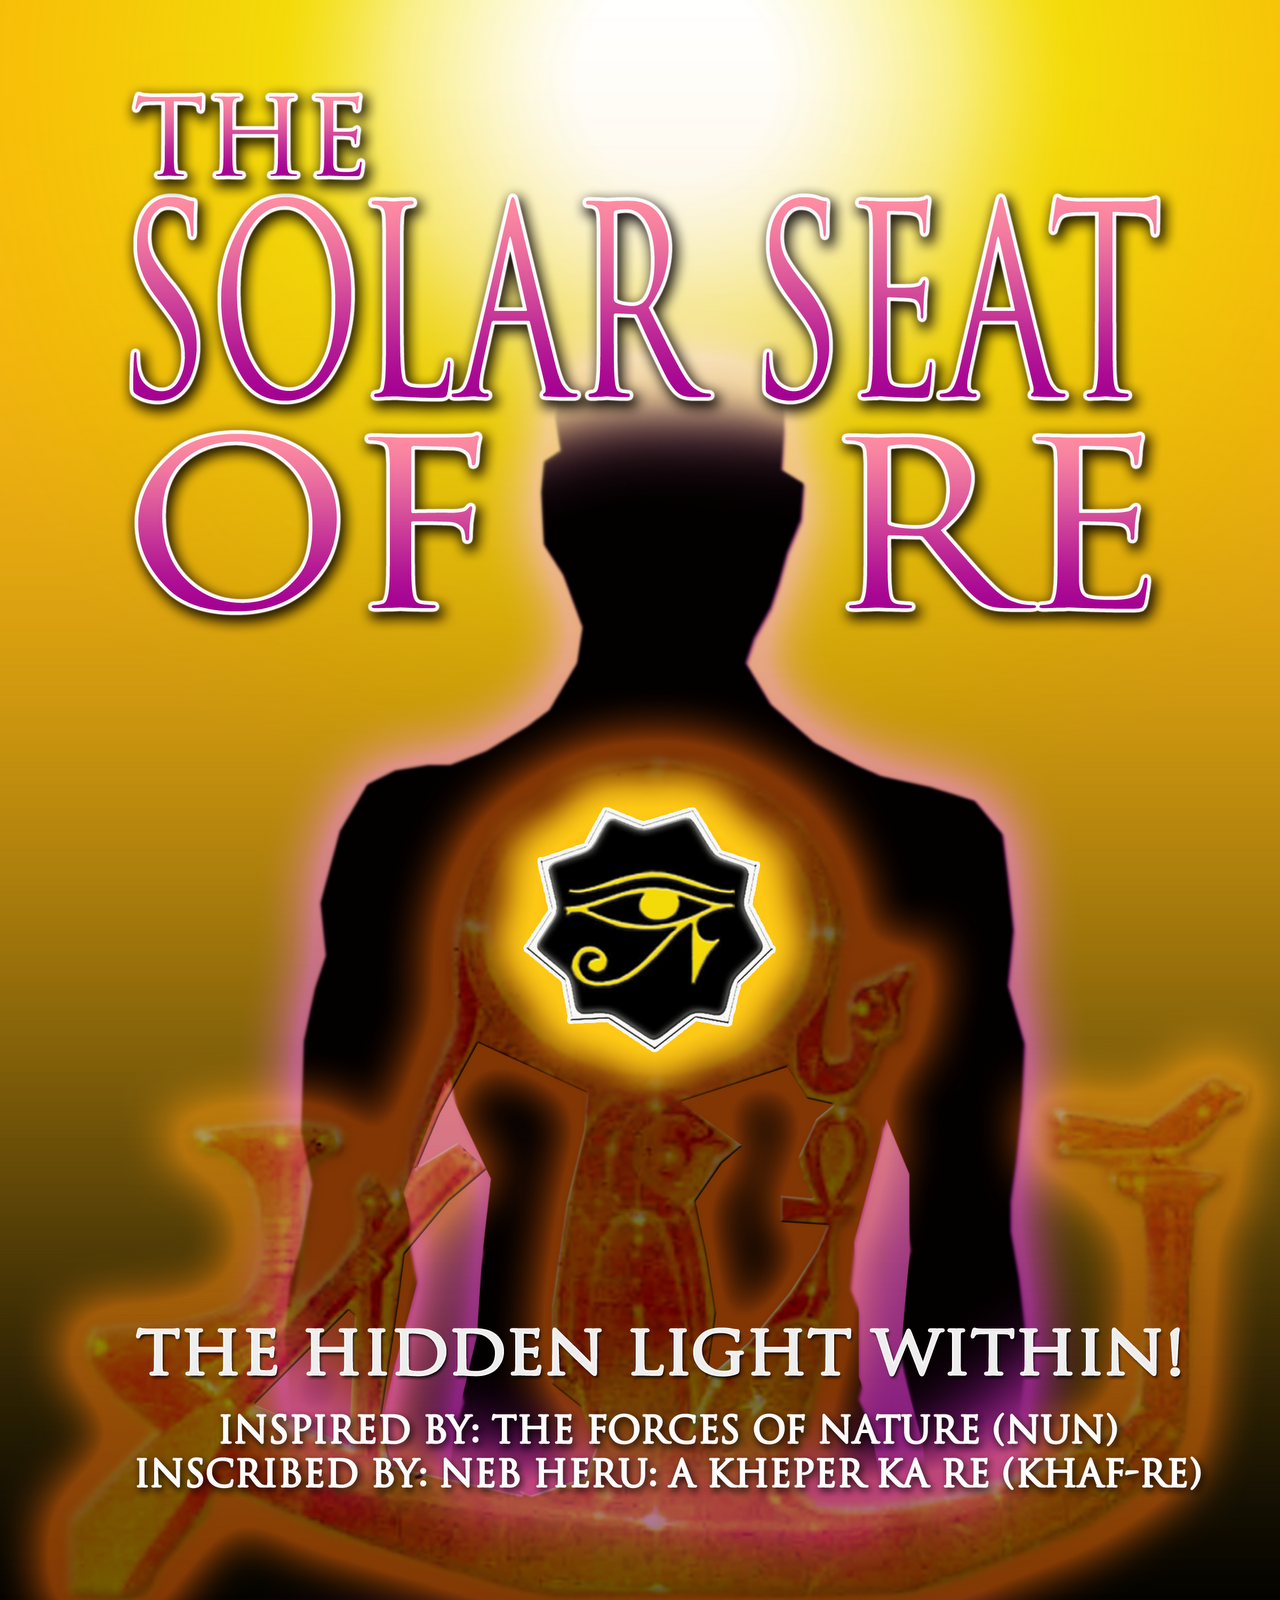 THE SOLAR SEAT OF RE